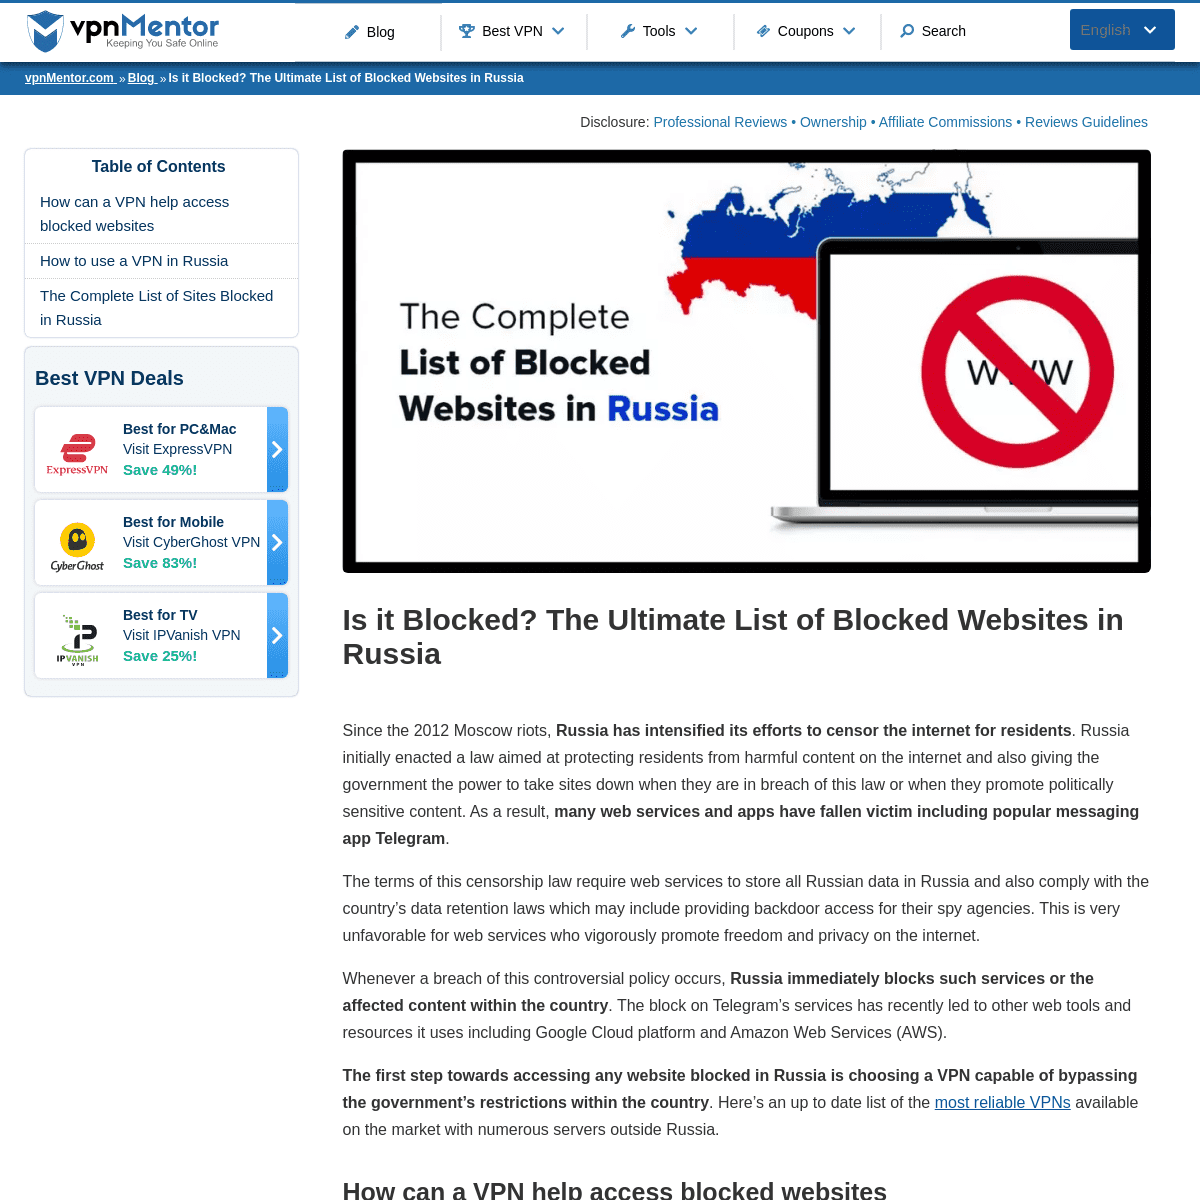 A complete backup of https://www.vpnmentor.com/blog/the-complete-list-of-sites-blocked-in-russia-and-how-to-access-them/